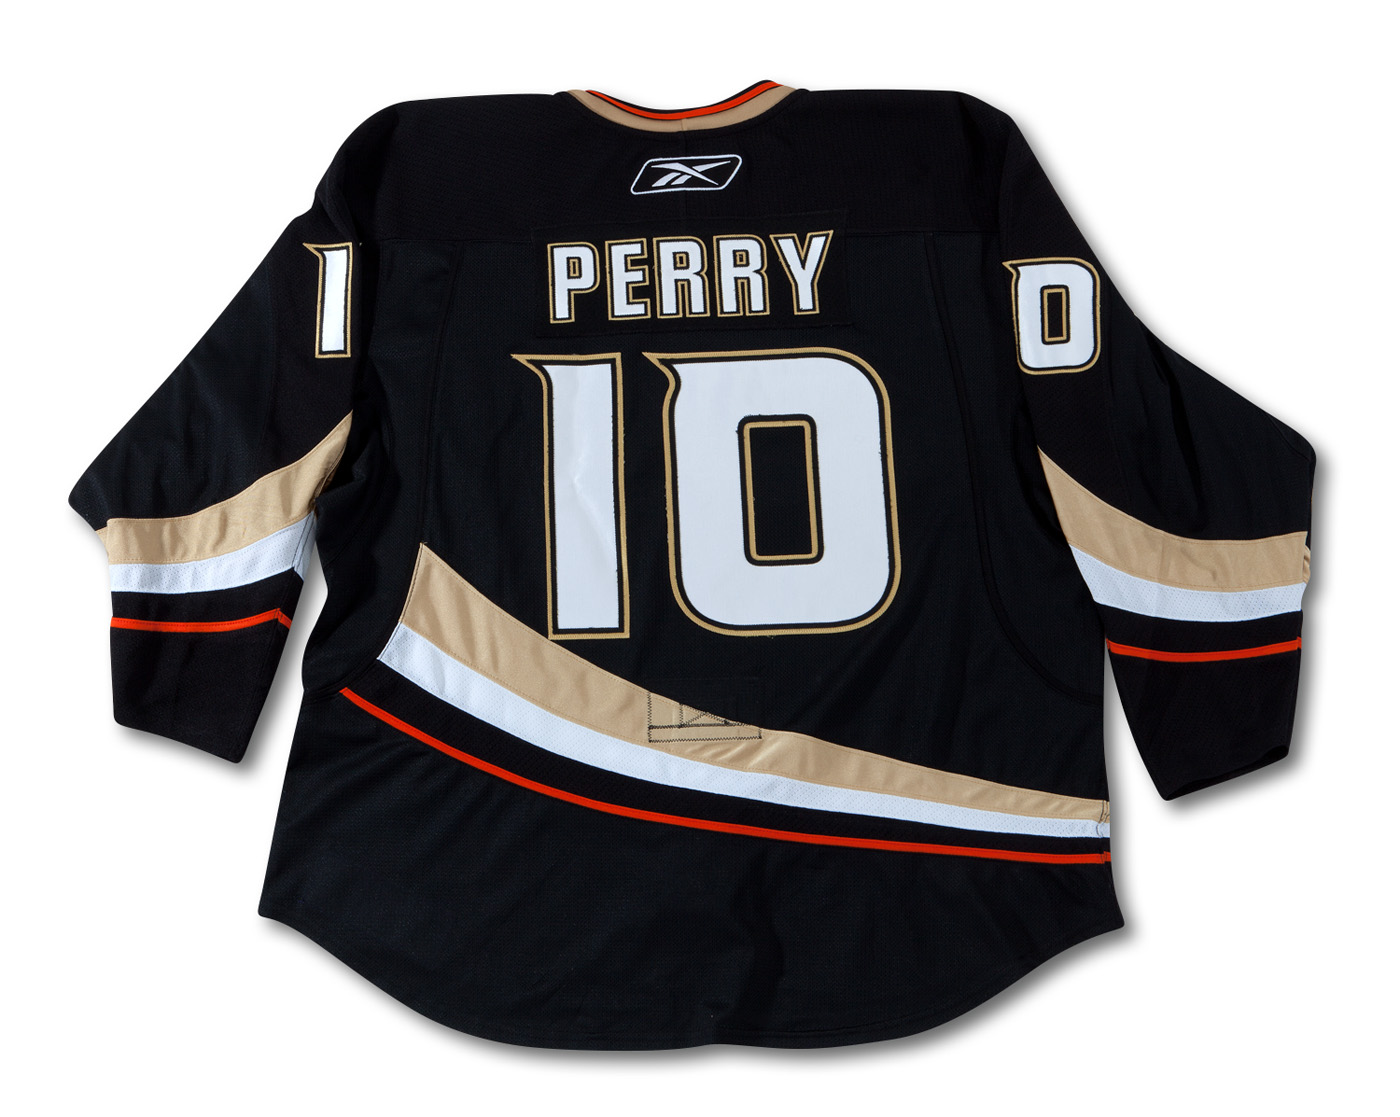 Corey Perry Jersey